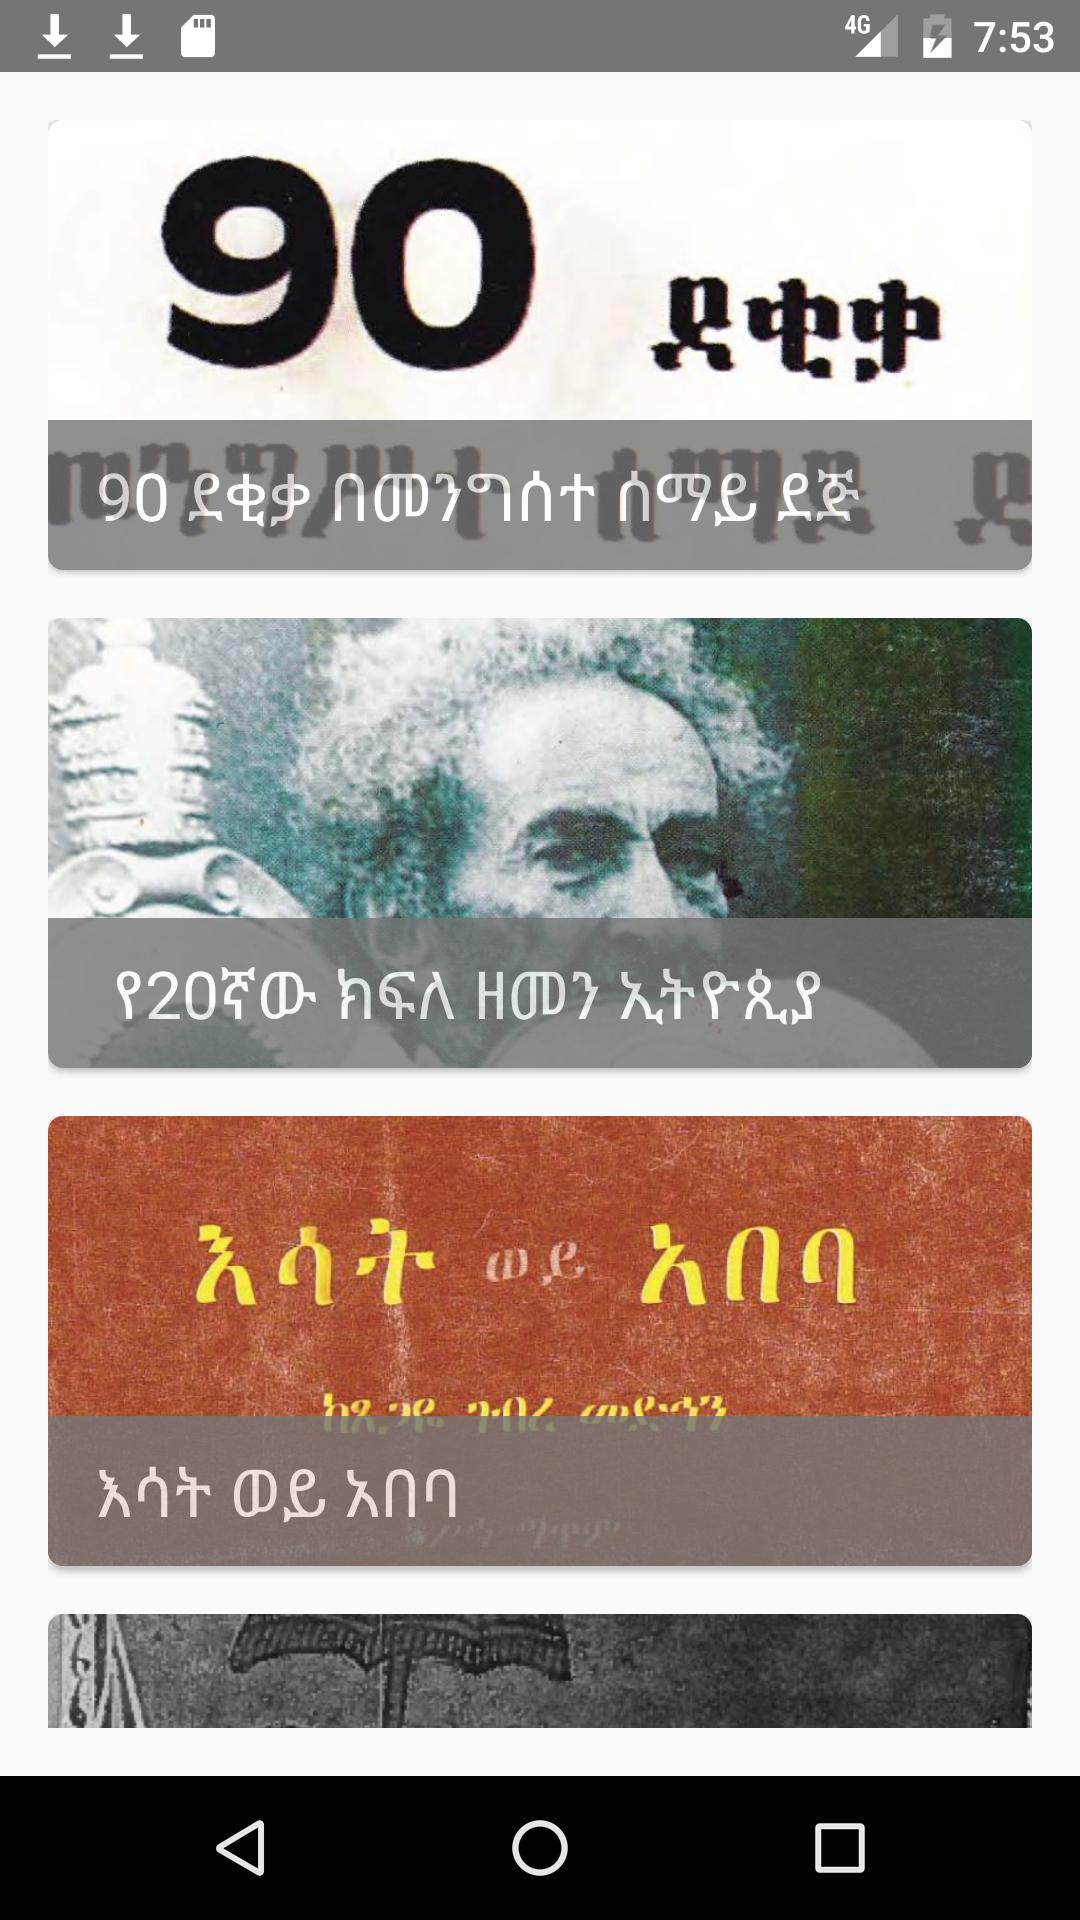 good amharic books welcome free download pdf